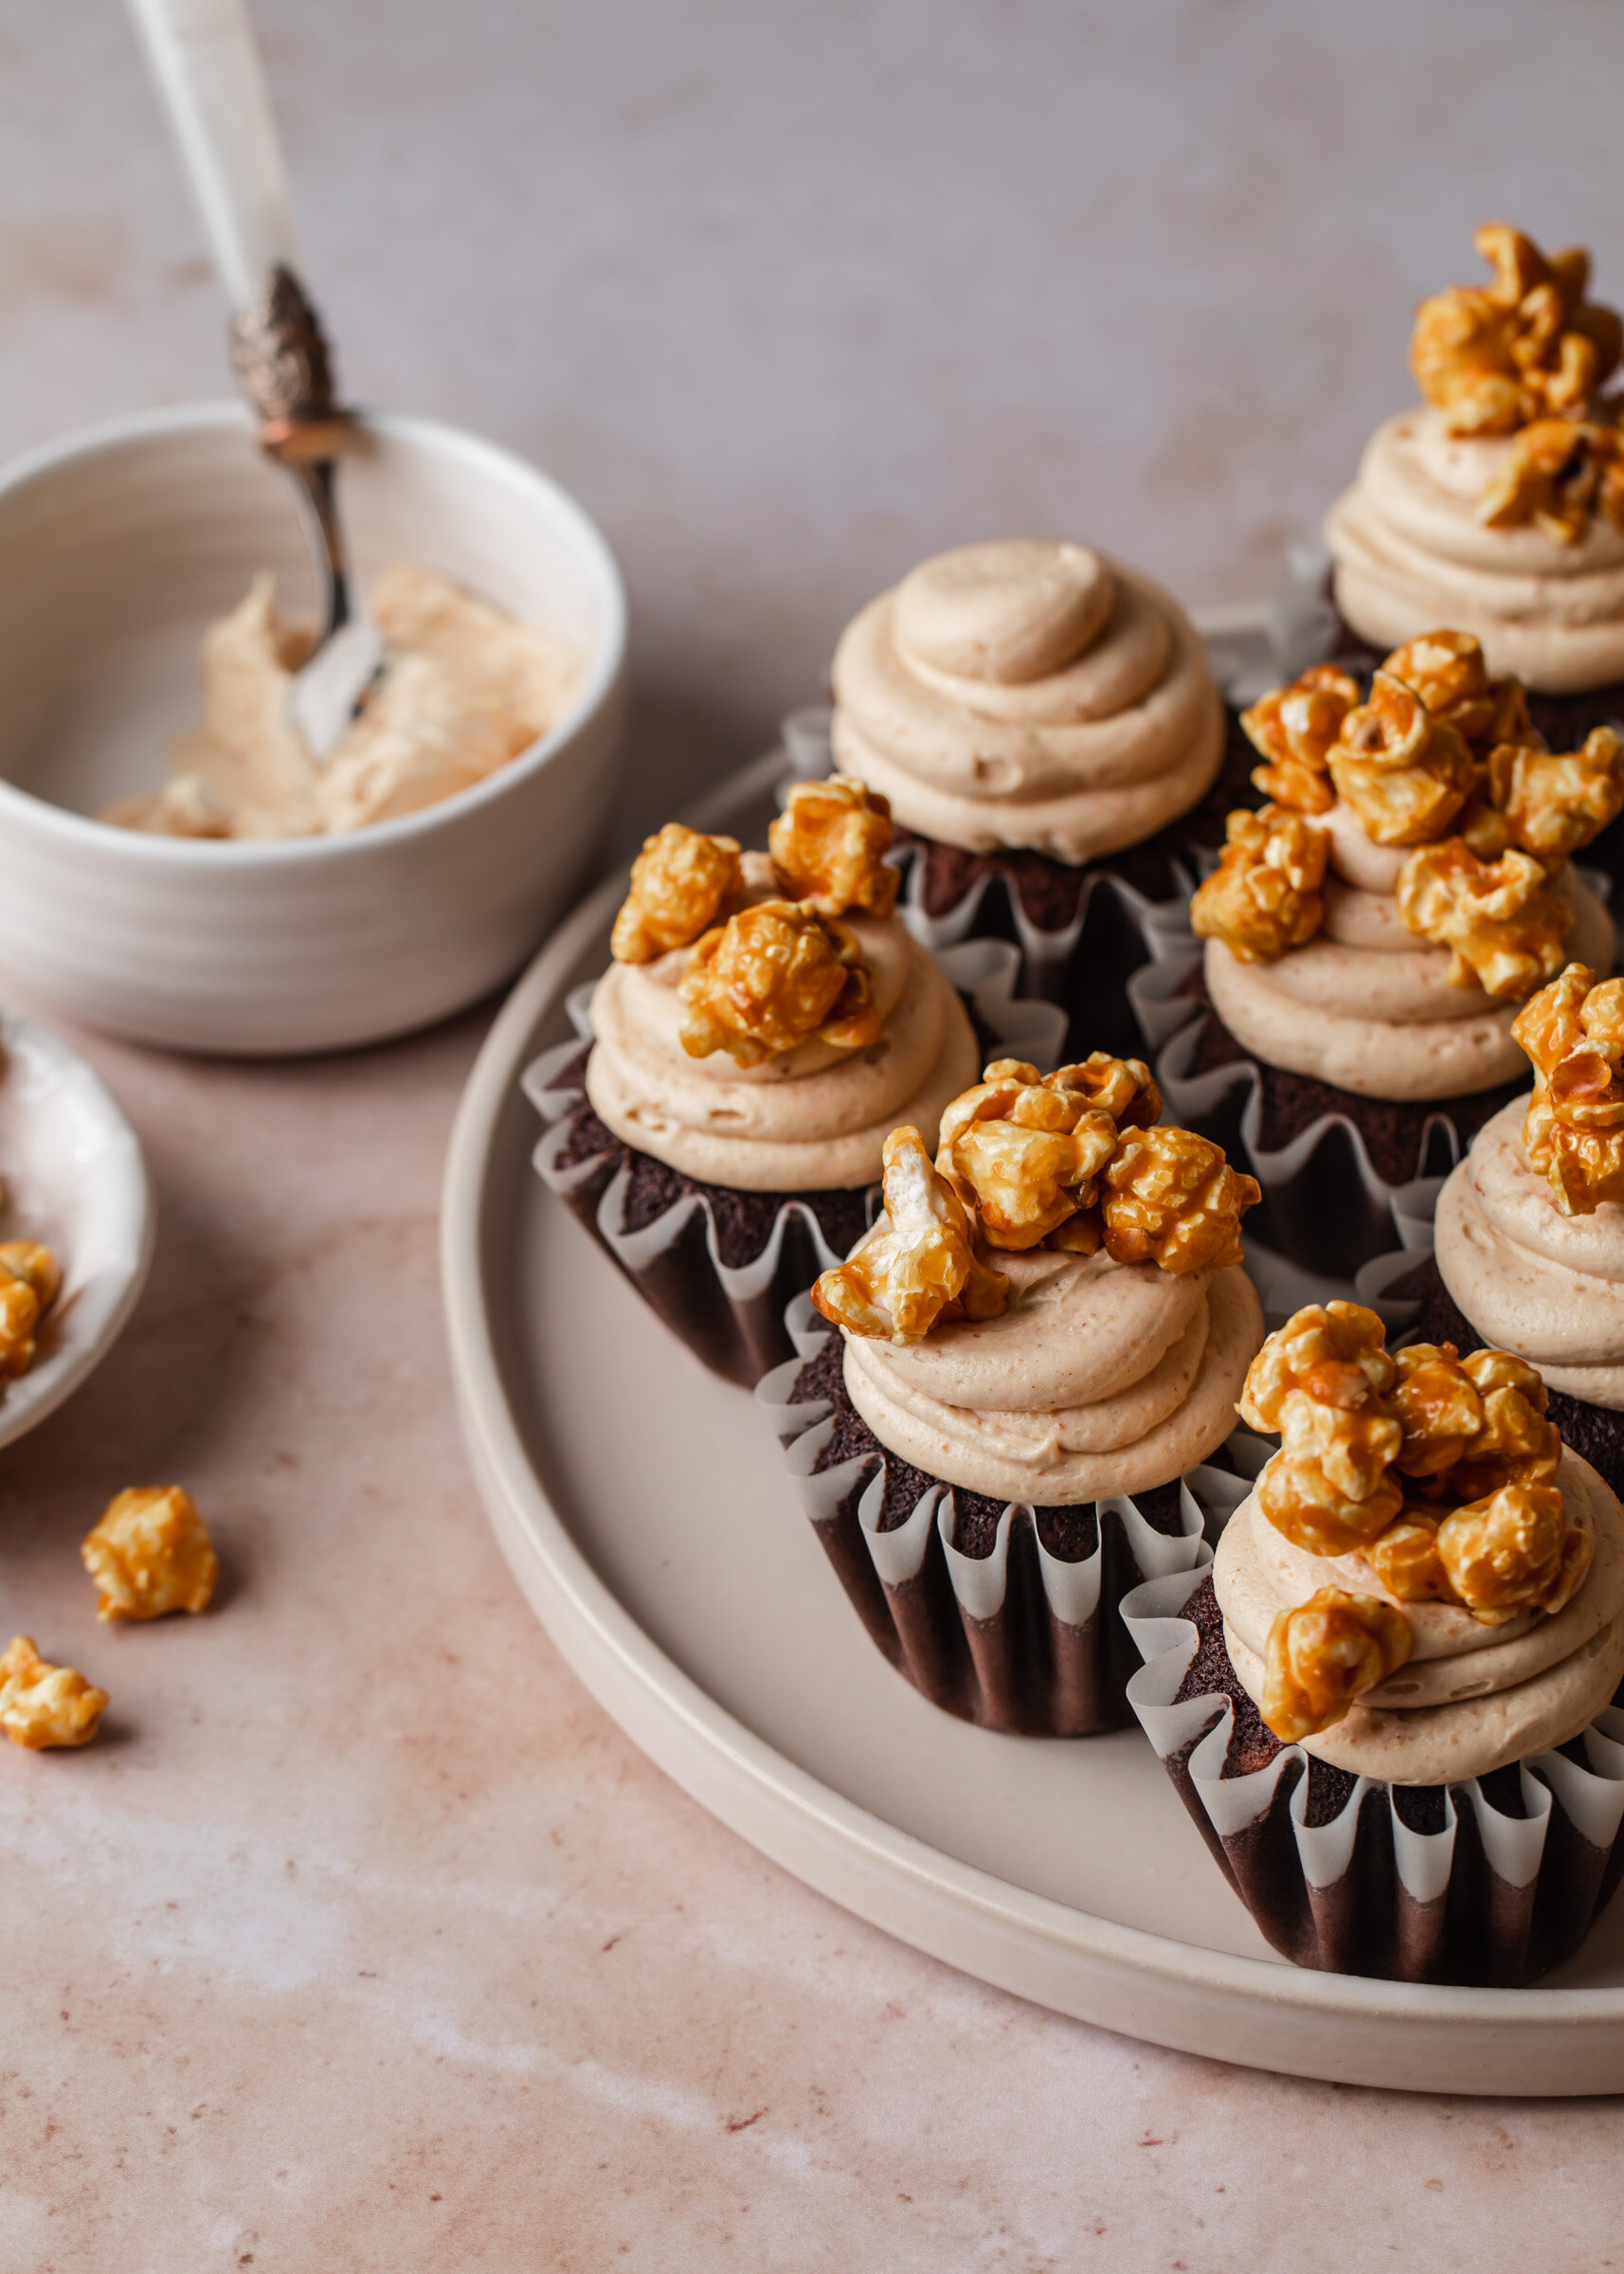 A serving plate of chocolate cupcakes  with creamy peanut butter frosting and caramel popcorn on top.